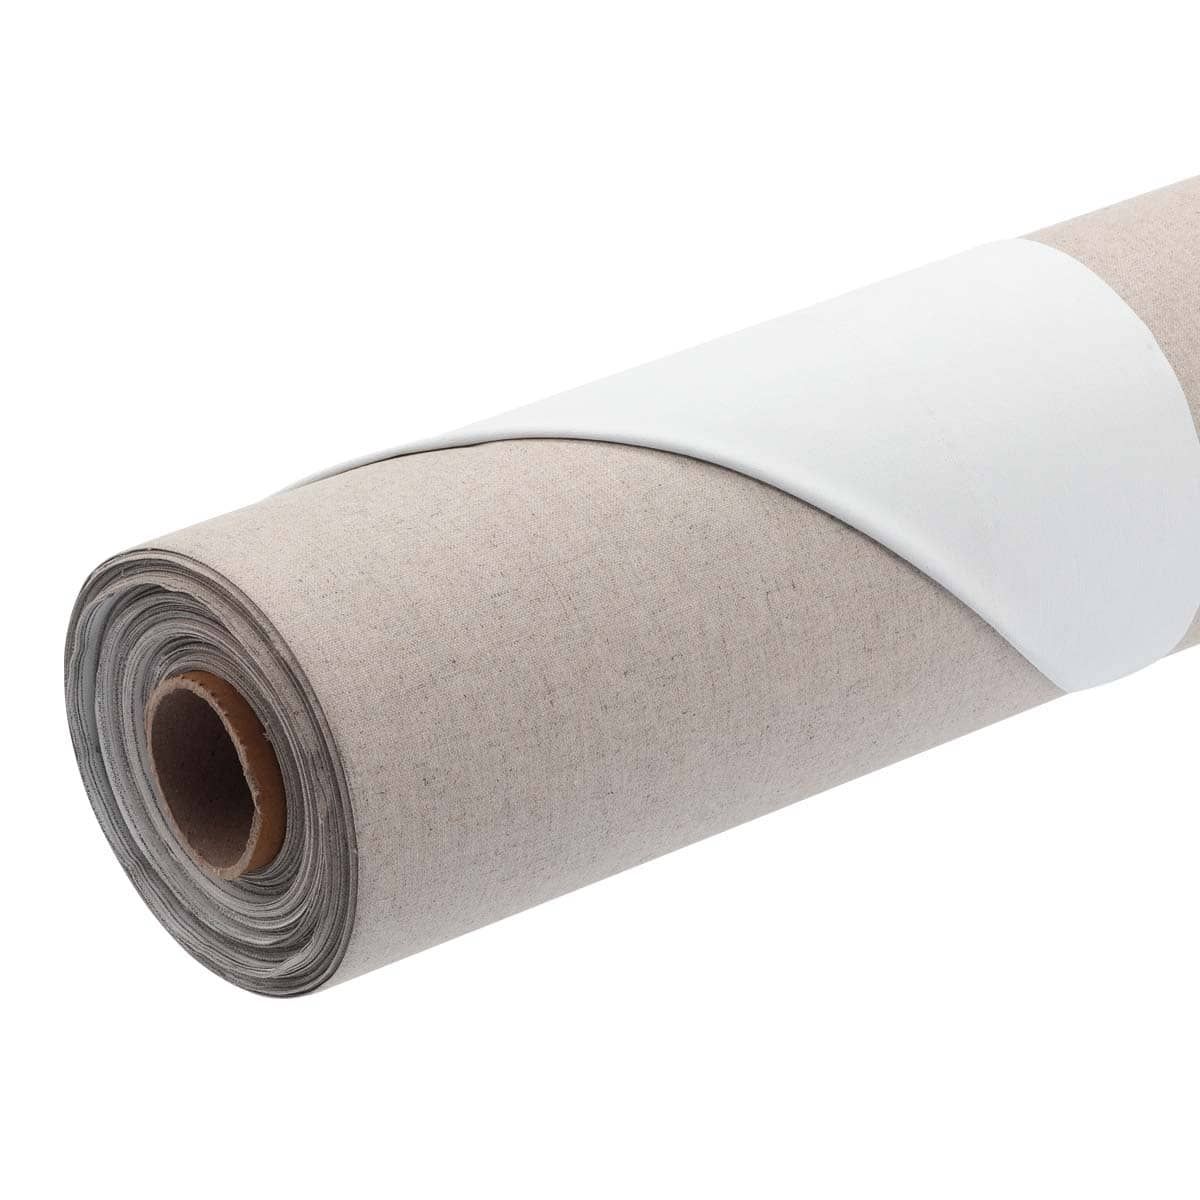 Roll of Canvas for Painting, 42 38 34 26 Inches 22 15 Wide Double Primed  Cotton Linen Canvas for Oil Acrylic, Canvas Rolls for Art Department